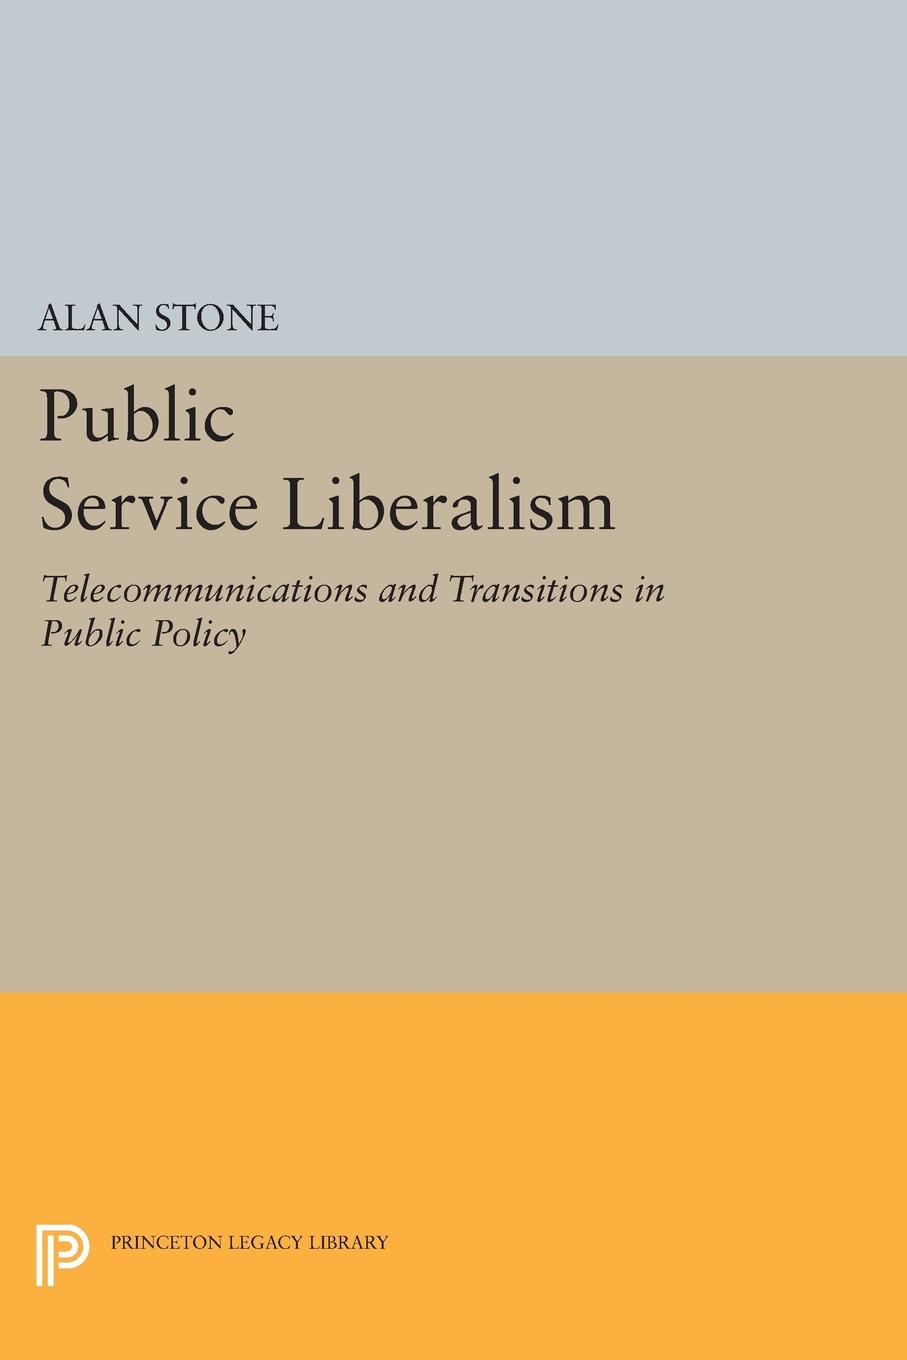 Public Service Liberalism. Telecommunications and Transitions in Public Policy